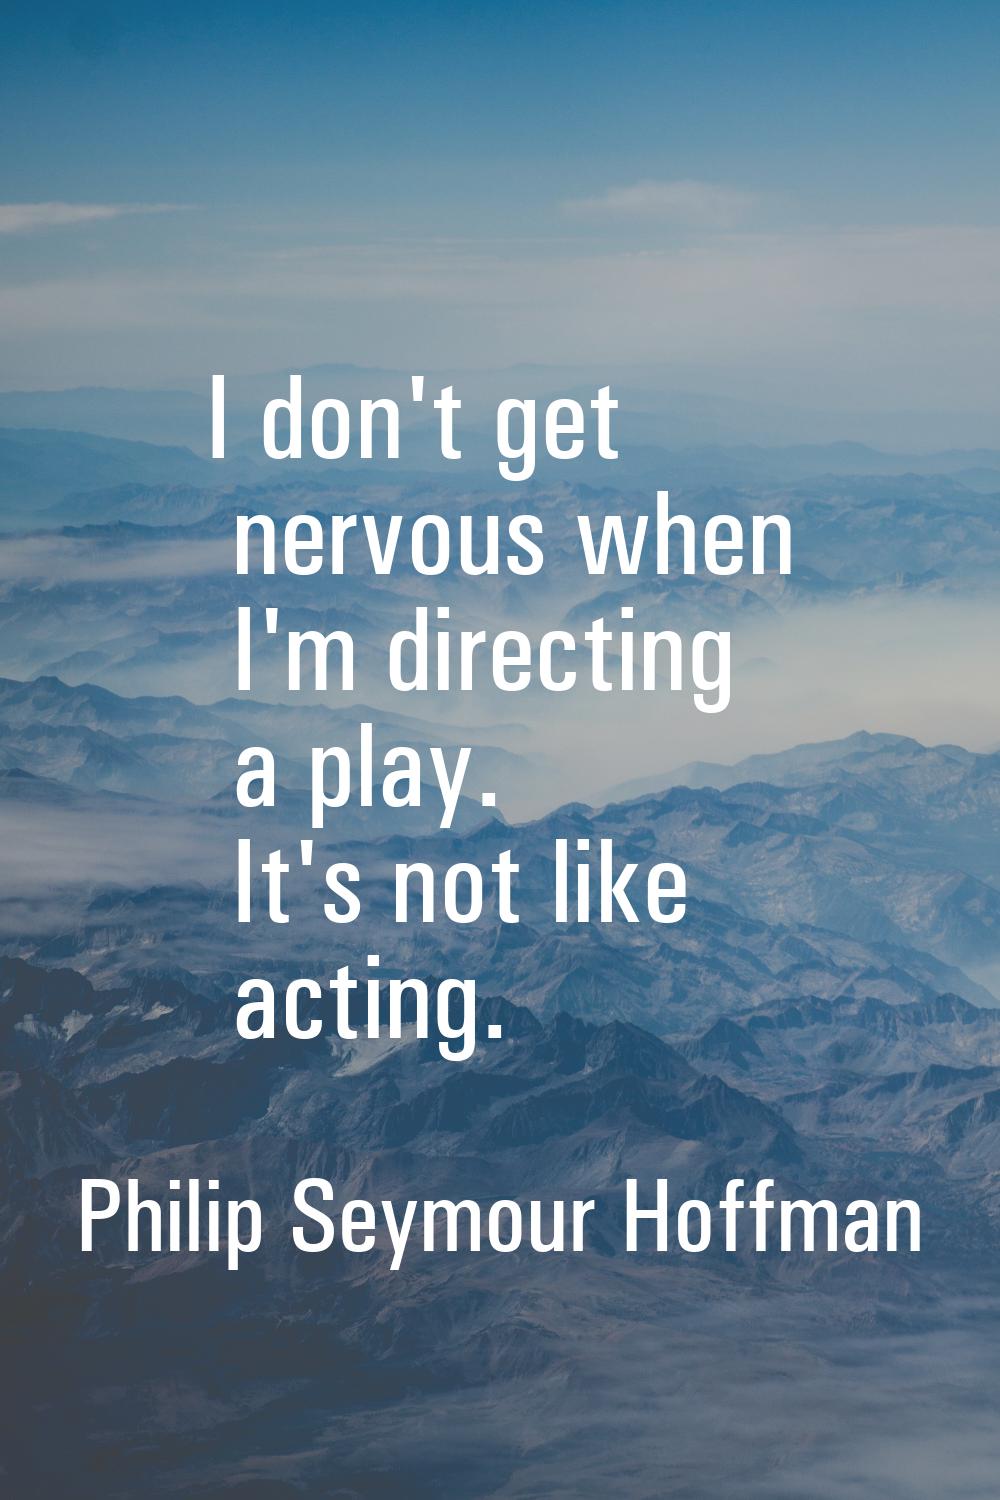 I don't get nervous when I'm directing a play. It's not like acting.